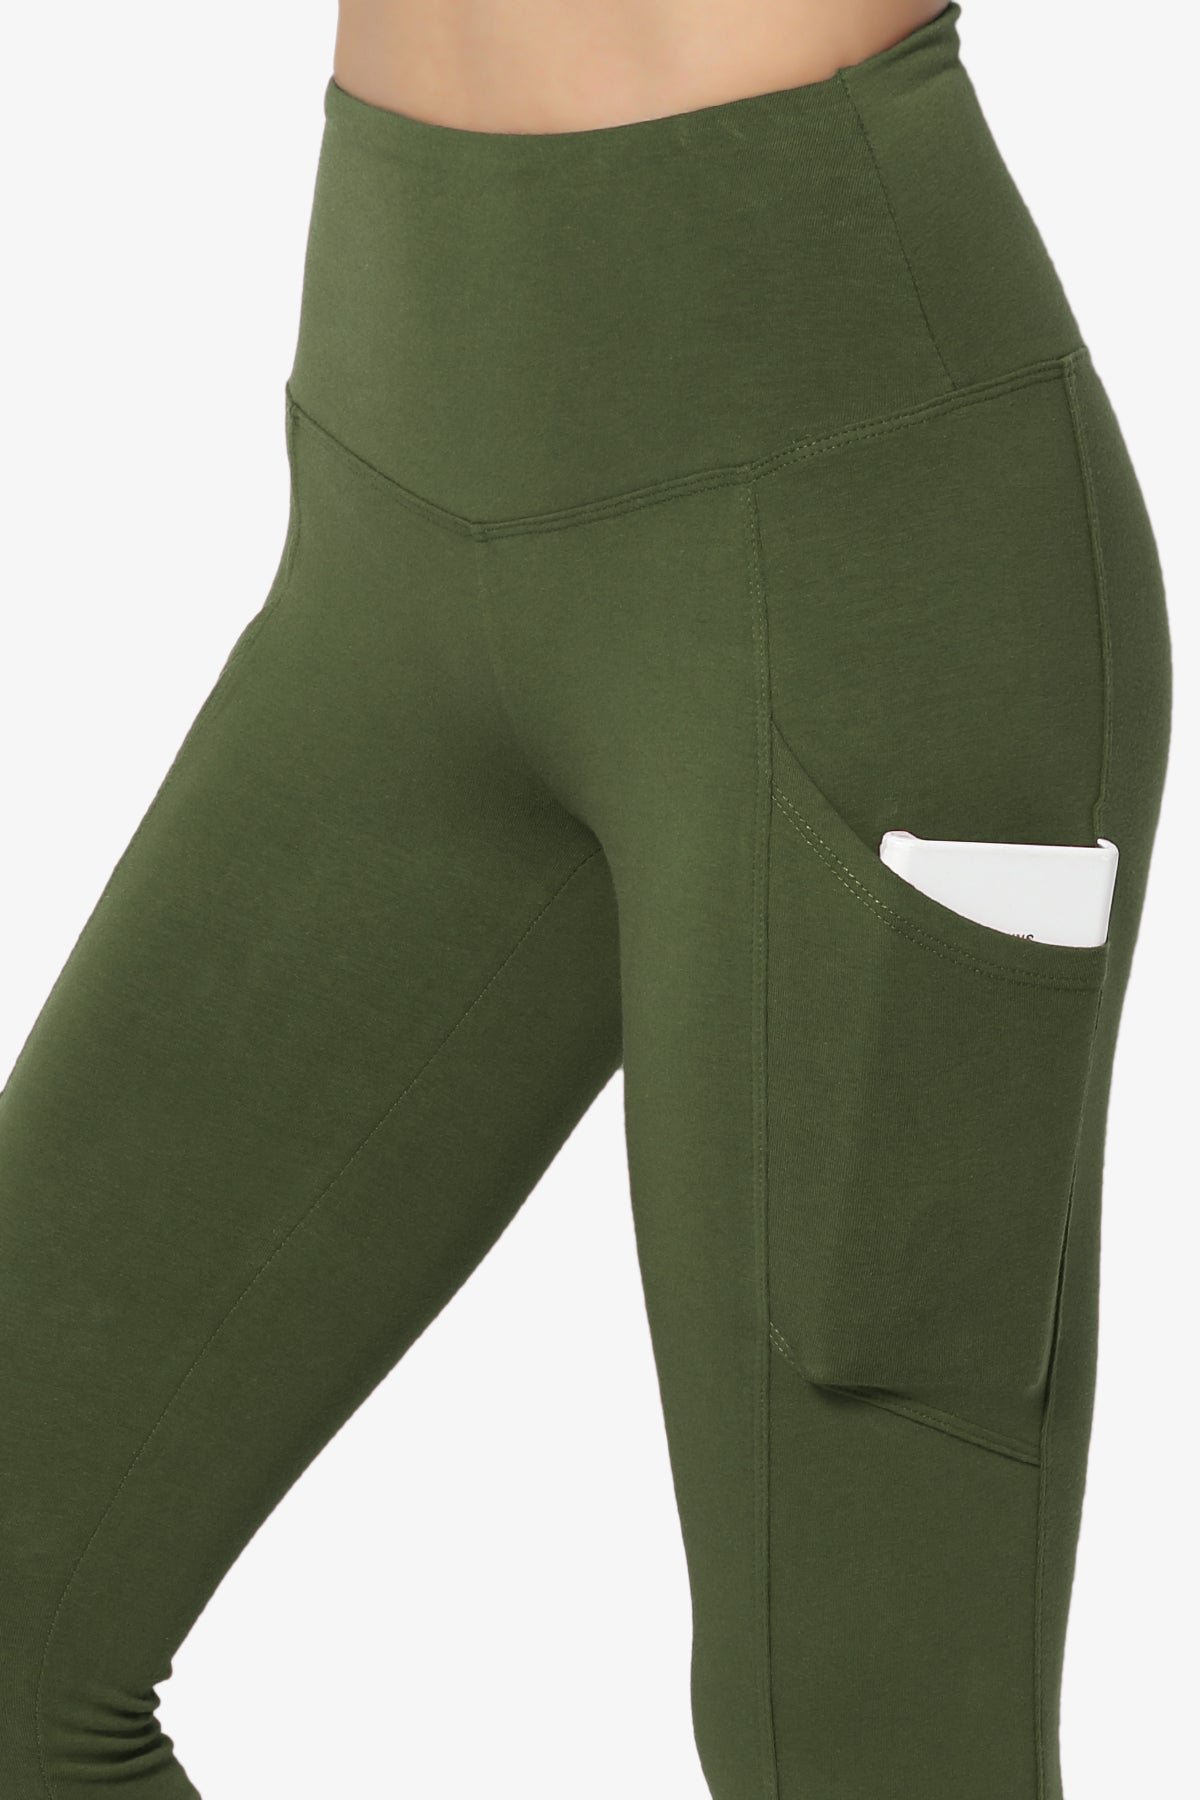 Ansley Luxe Cotton Leggings with Pockets ARMY GREEN_5